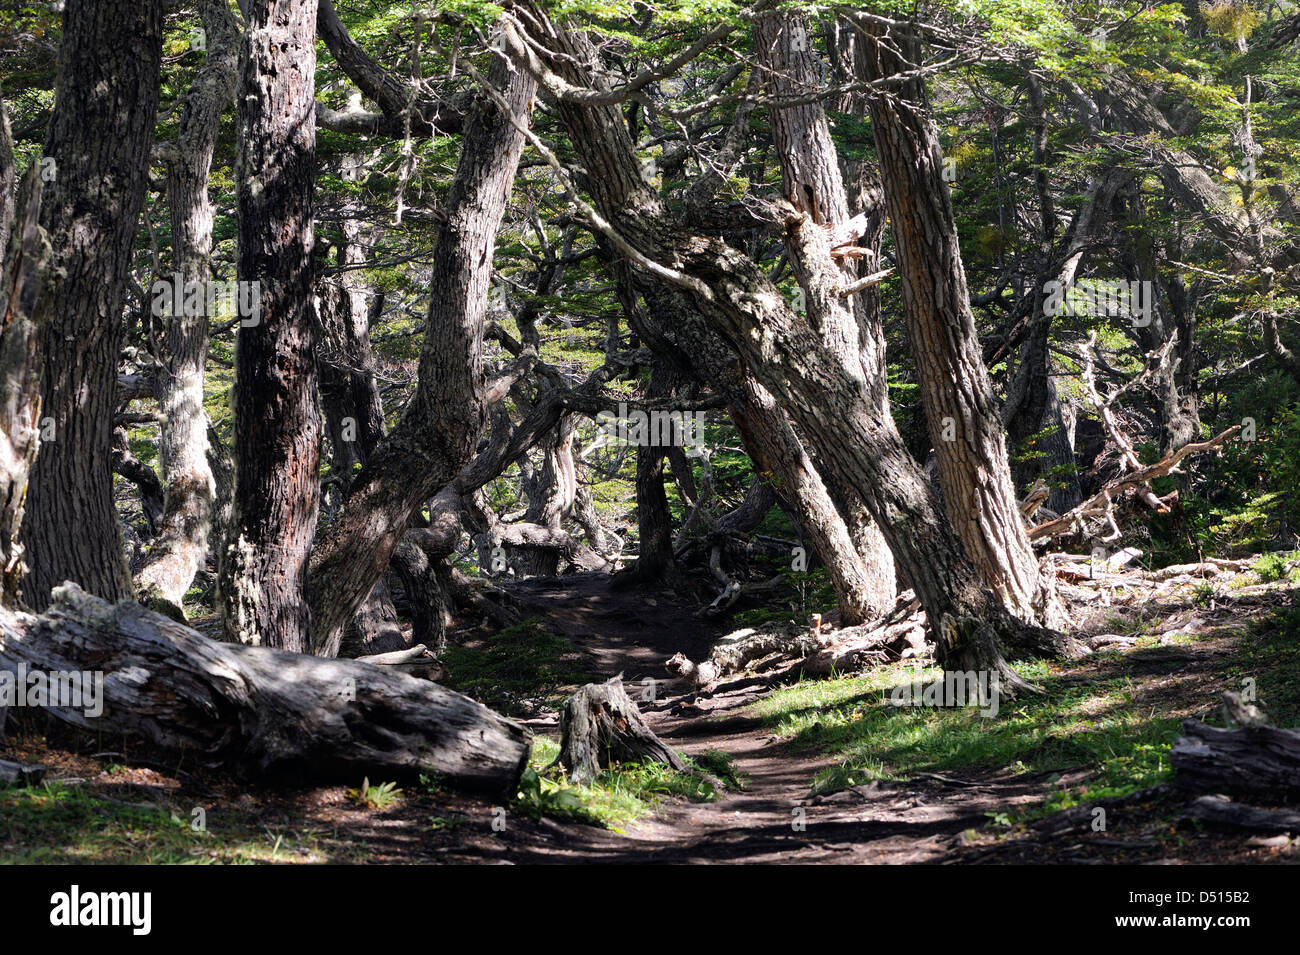 Ancient Guindo, Evergreen Southern Beech (Nothofagus betuloides) trees, the Costera Trail in the Tierra del Fuego National Park Stock Photo